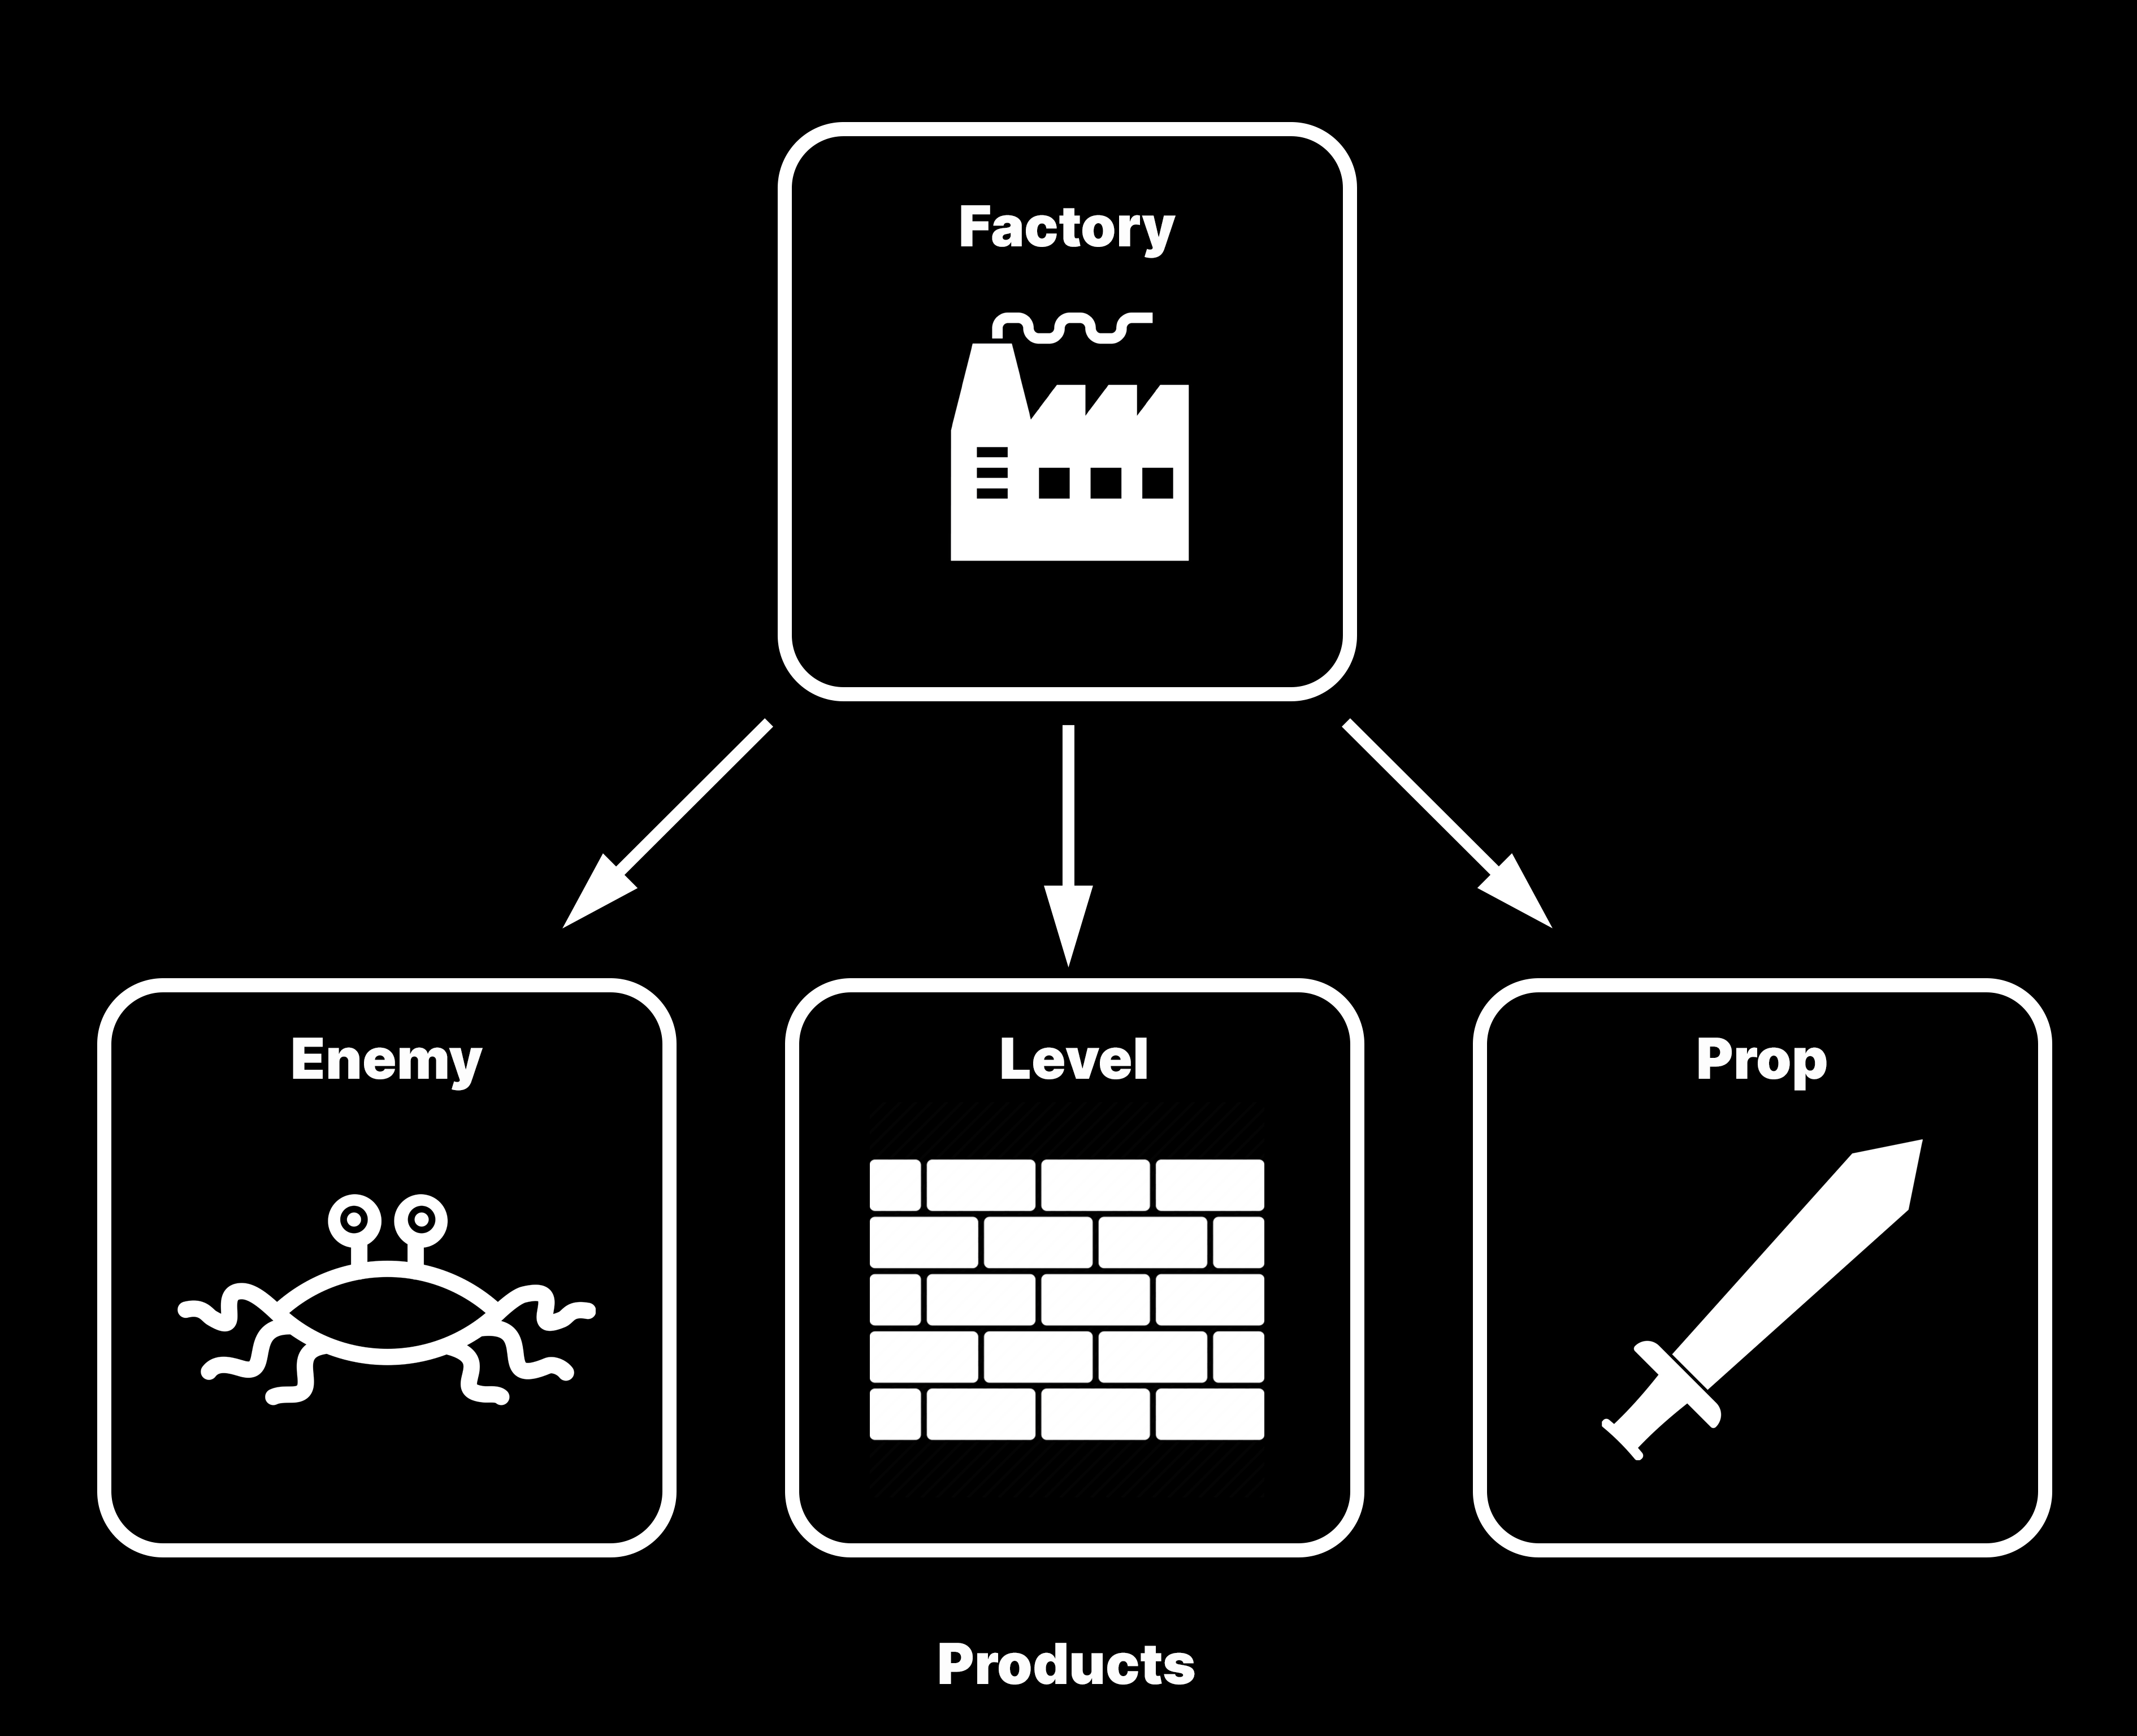 An illustration of the factory design pattern